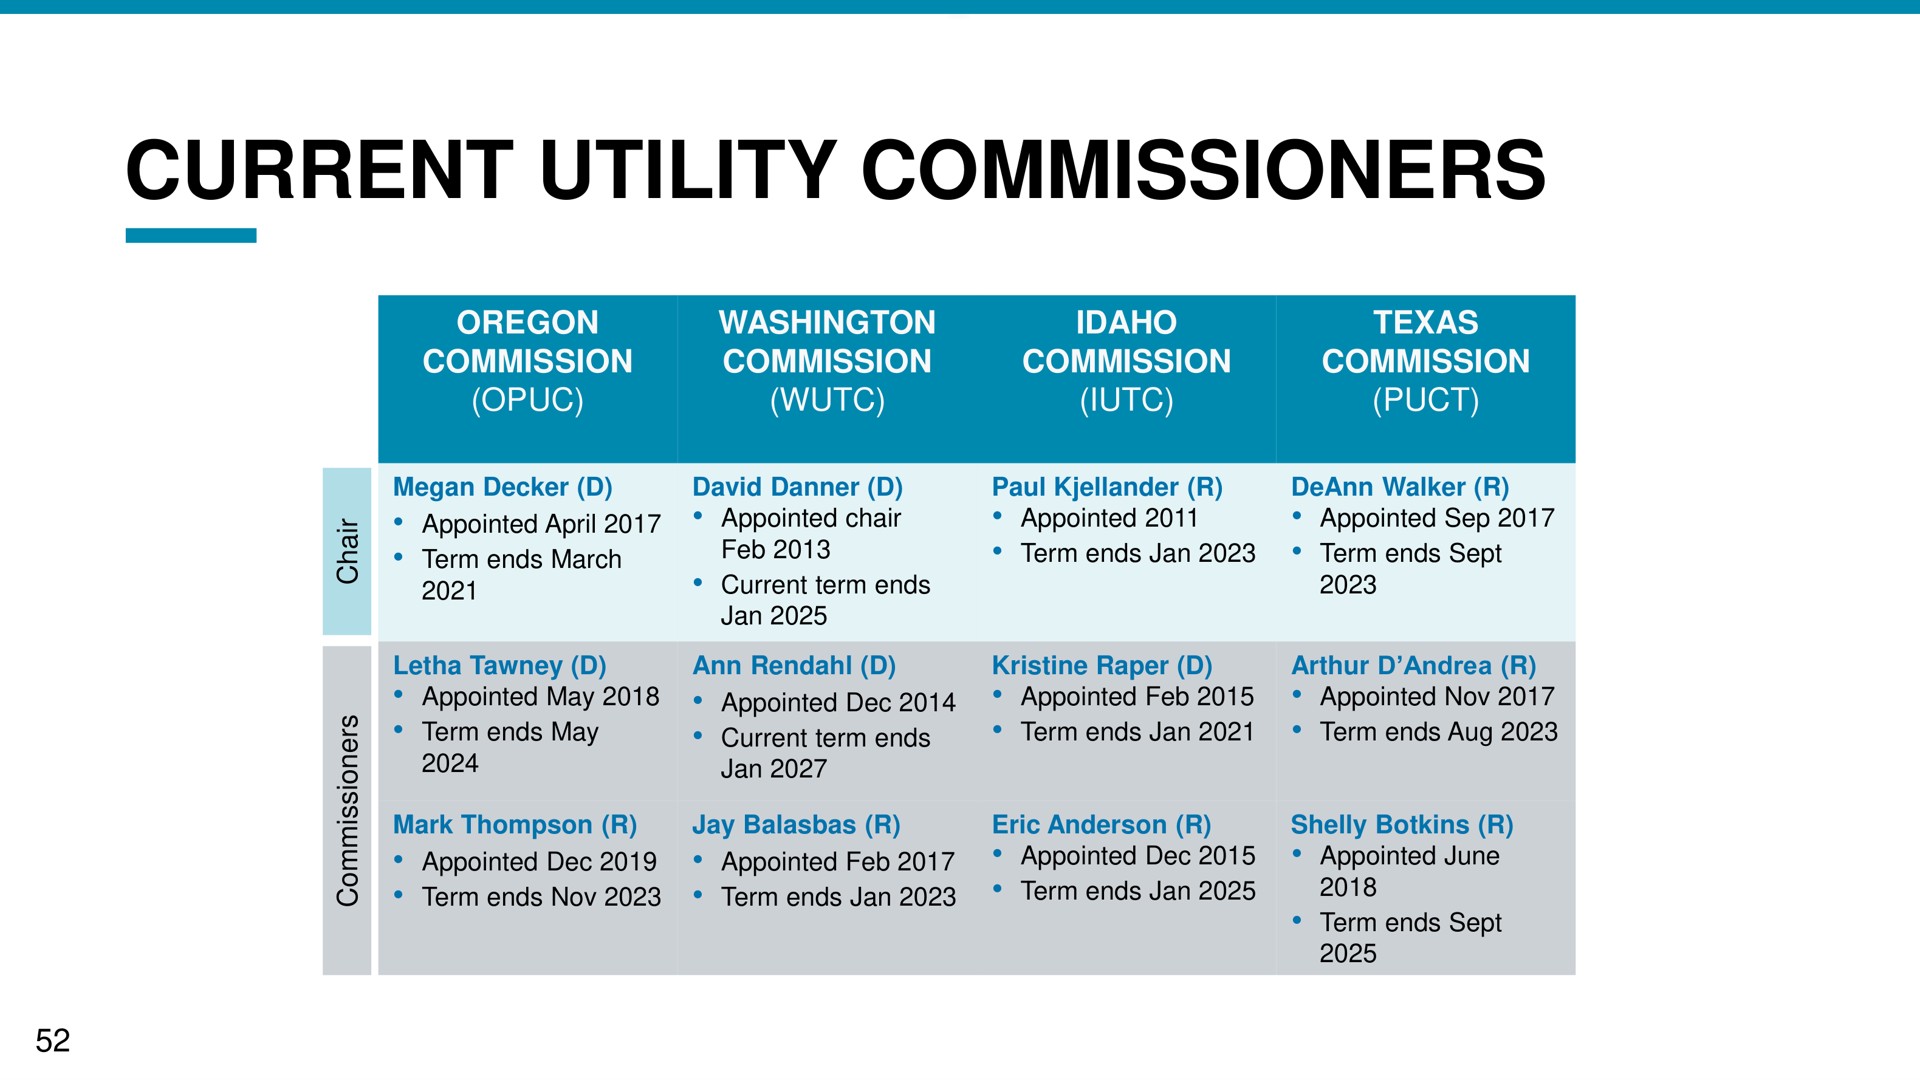 current utility commissioners | NW Natural Holdings